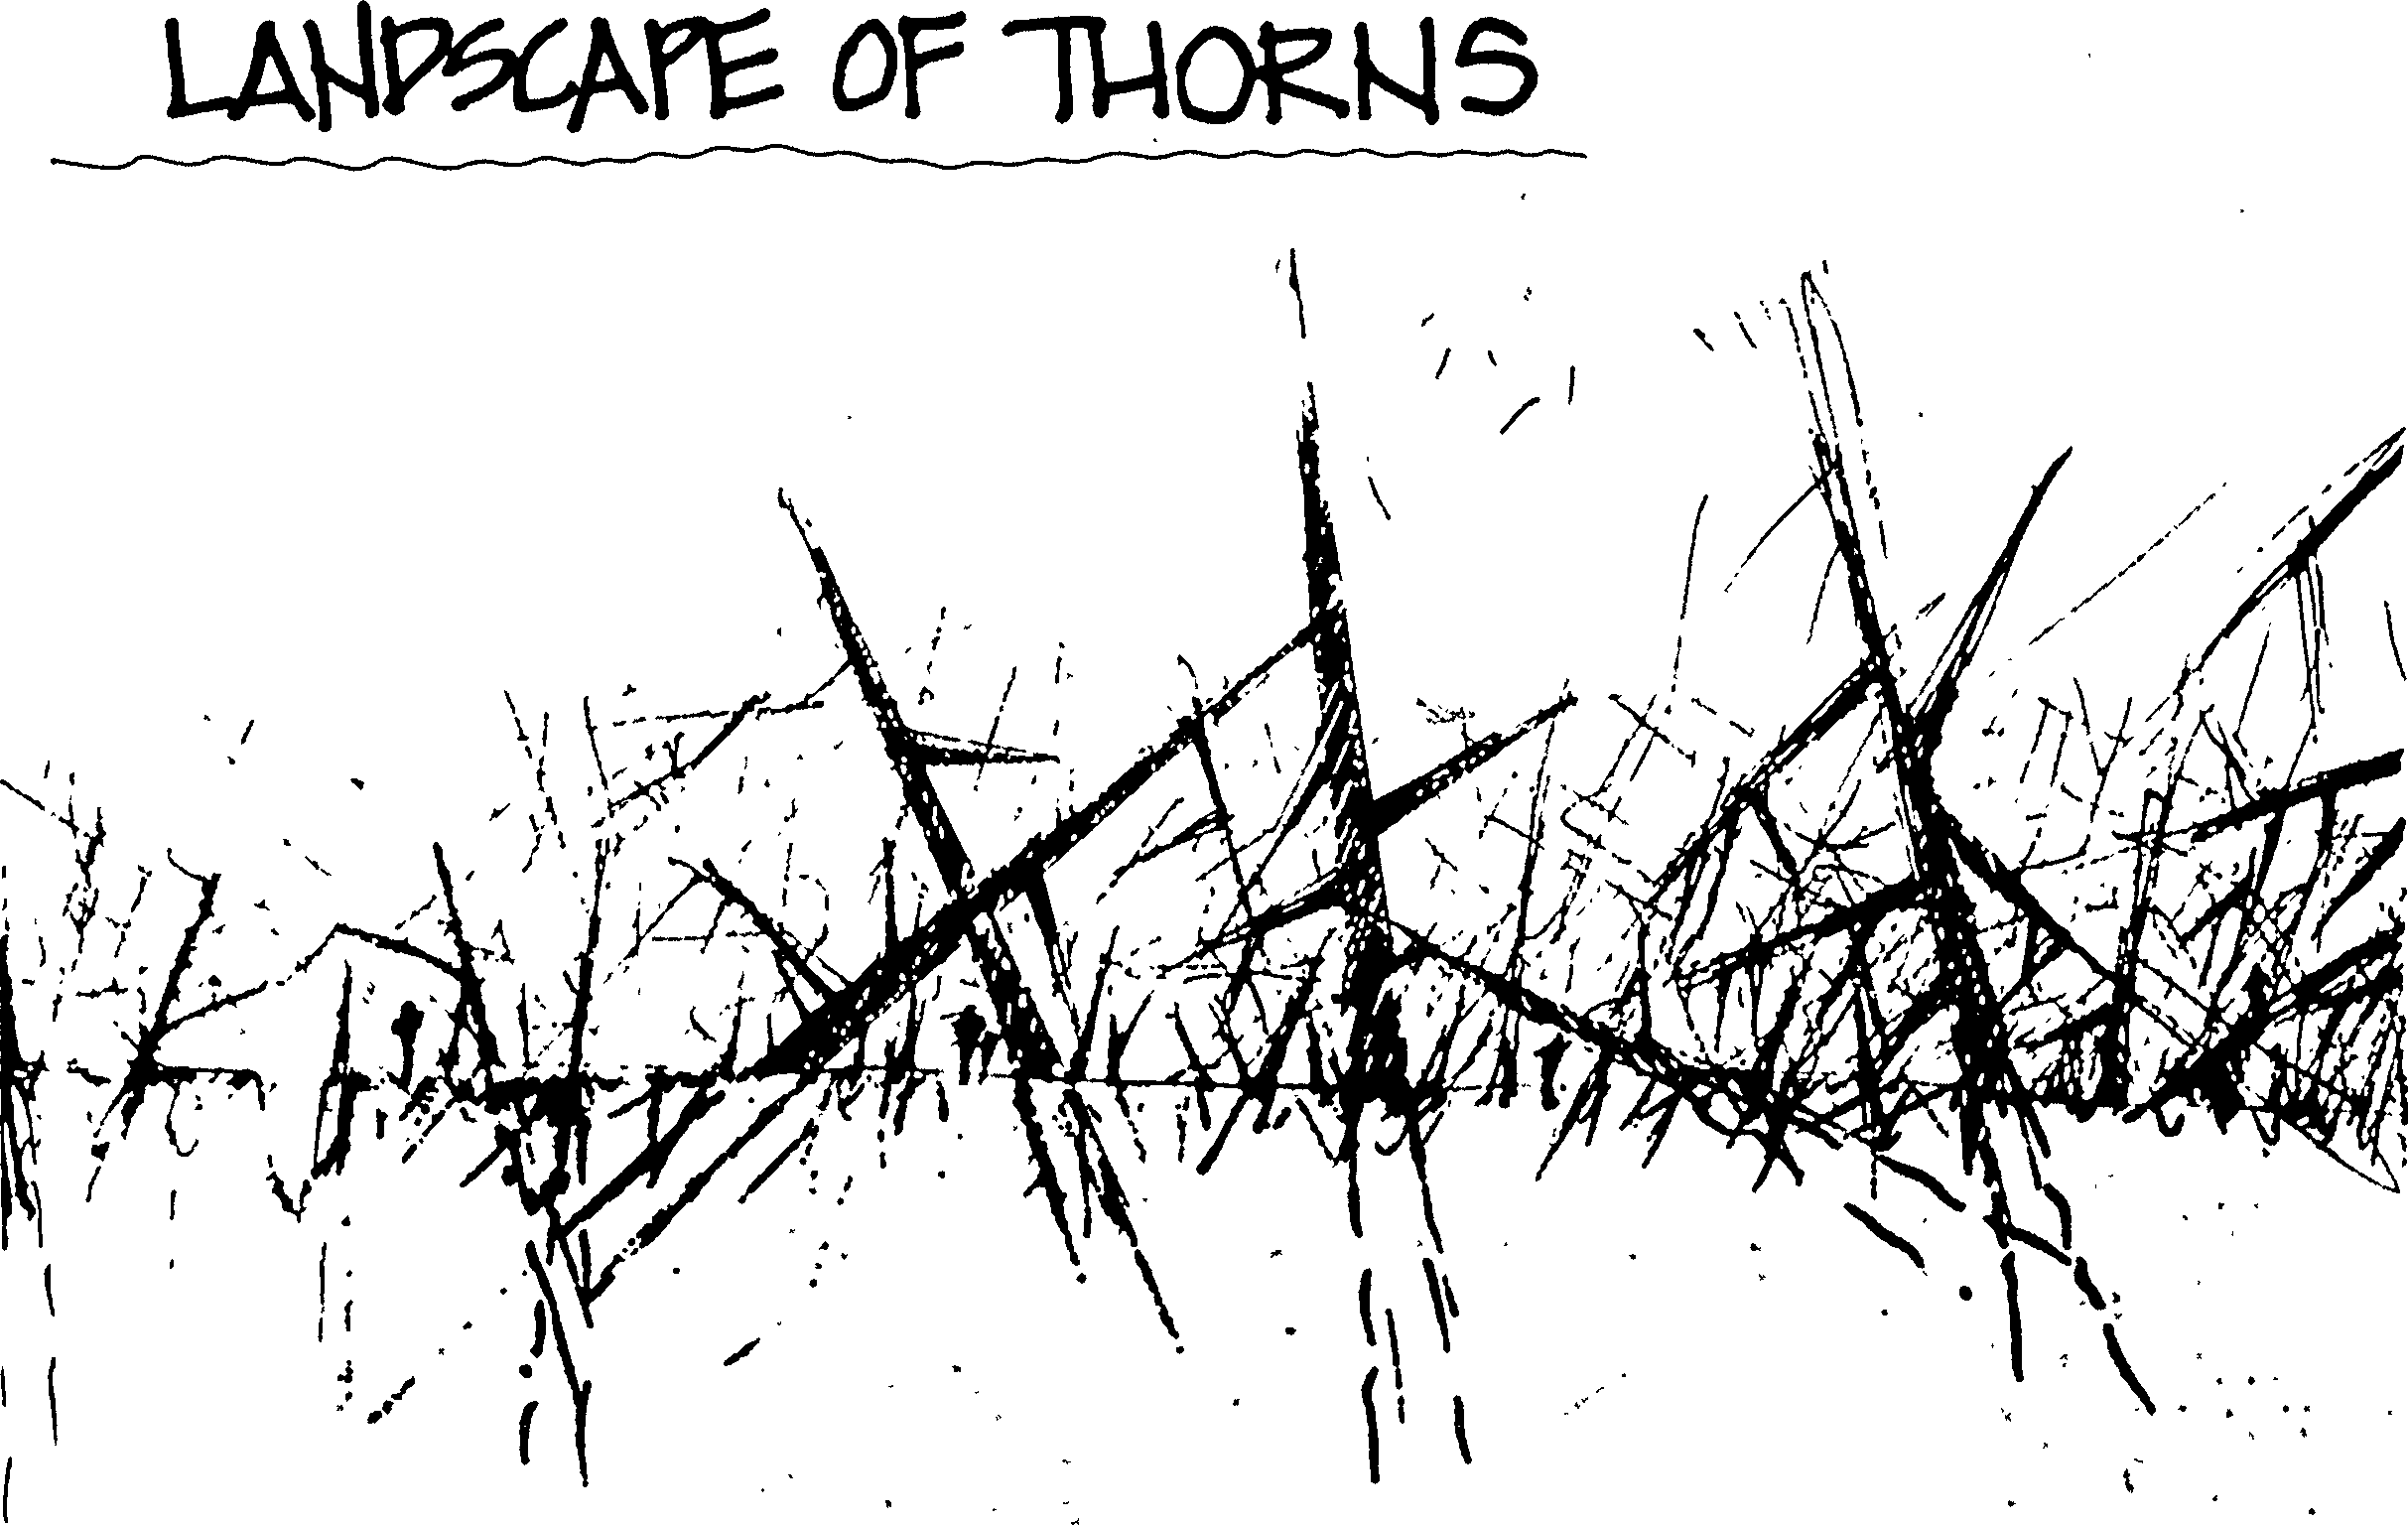 Drawing of a tangle of large stone spikes, showing the outlines each spike extending underground